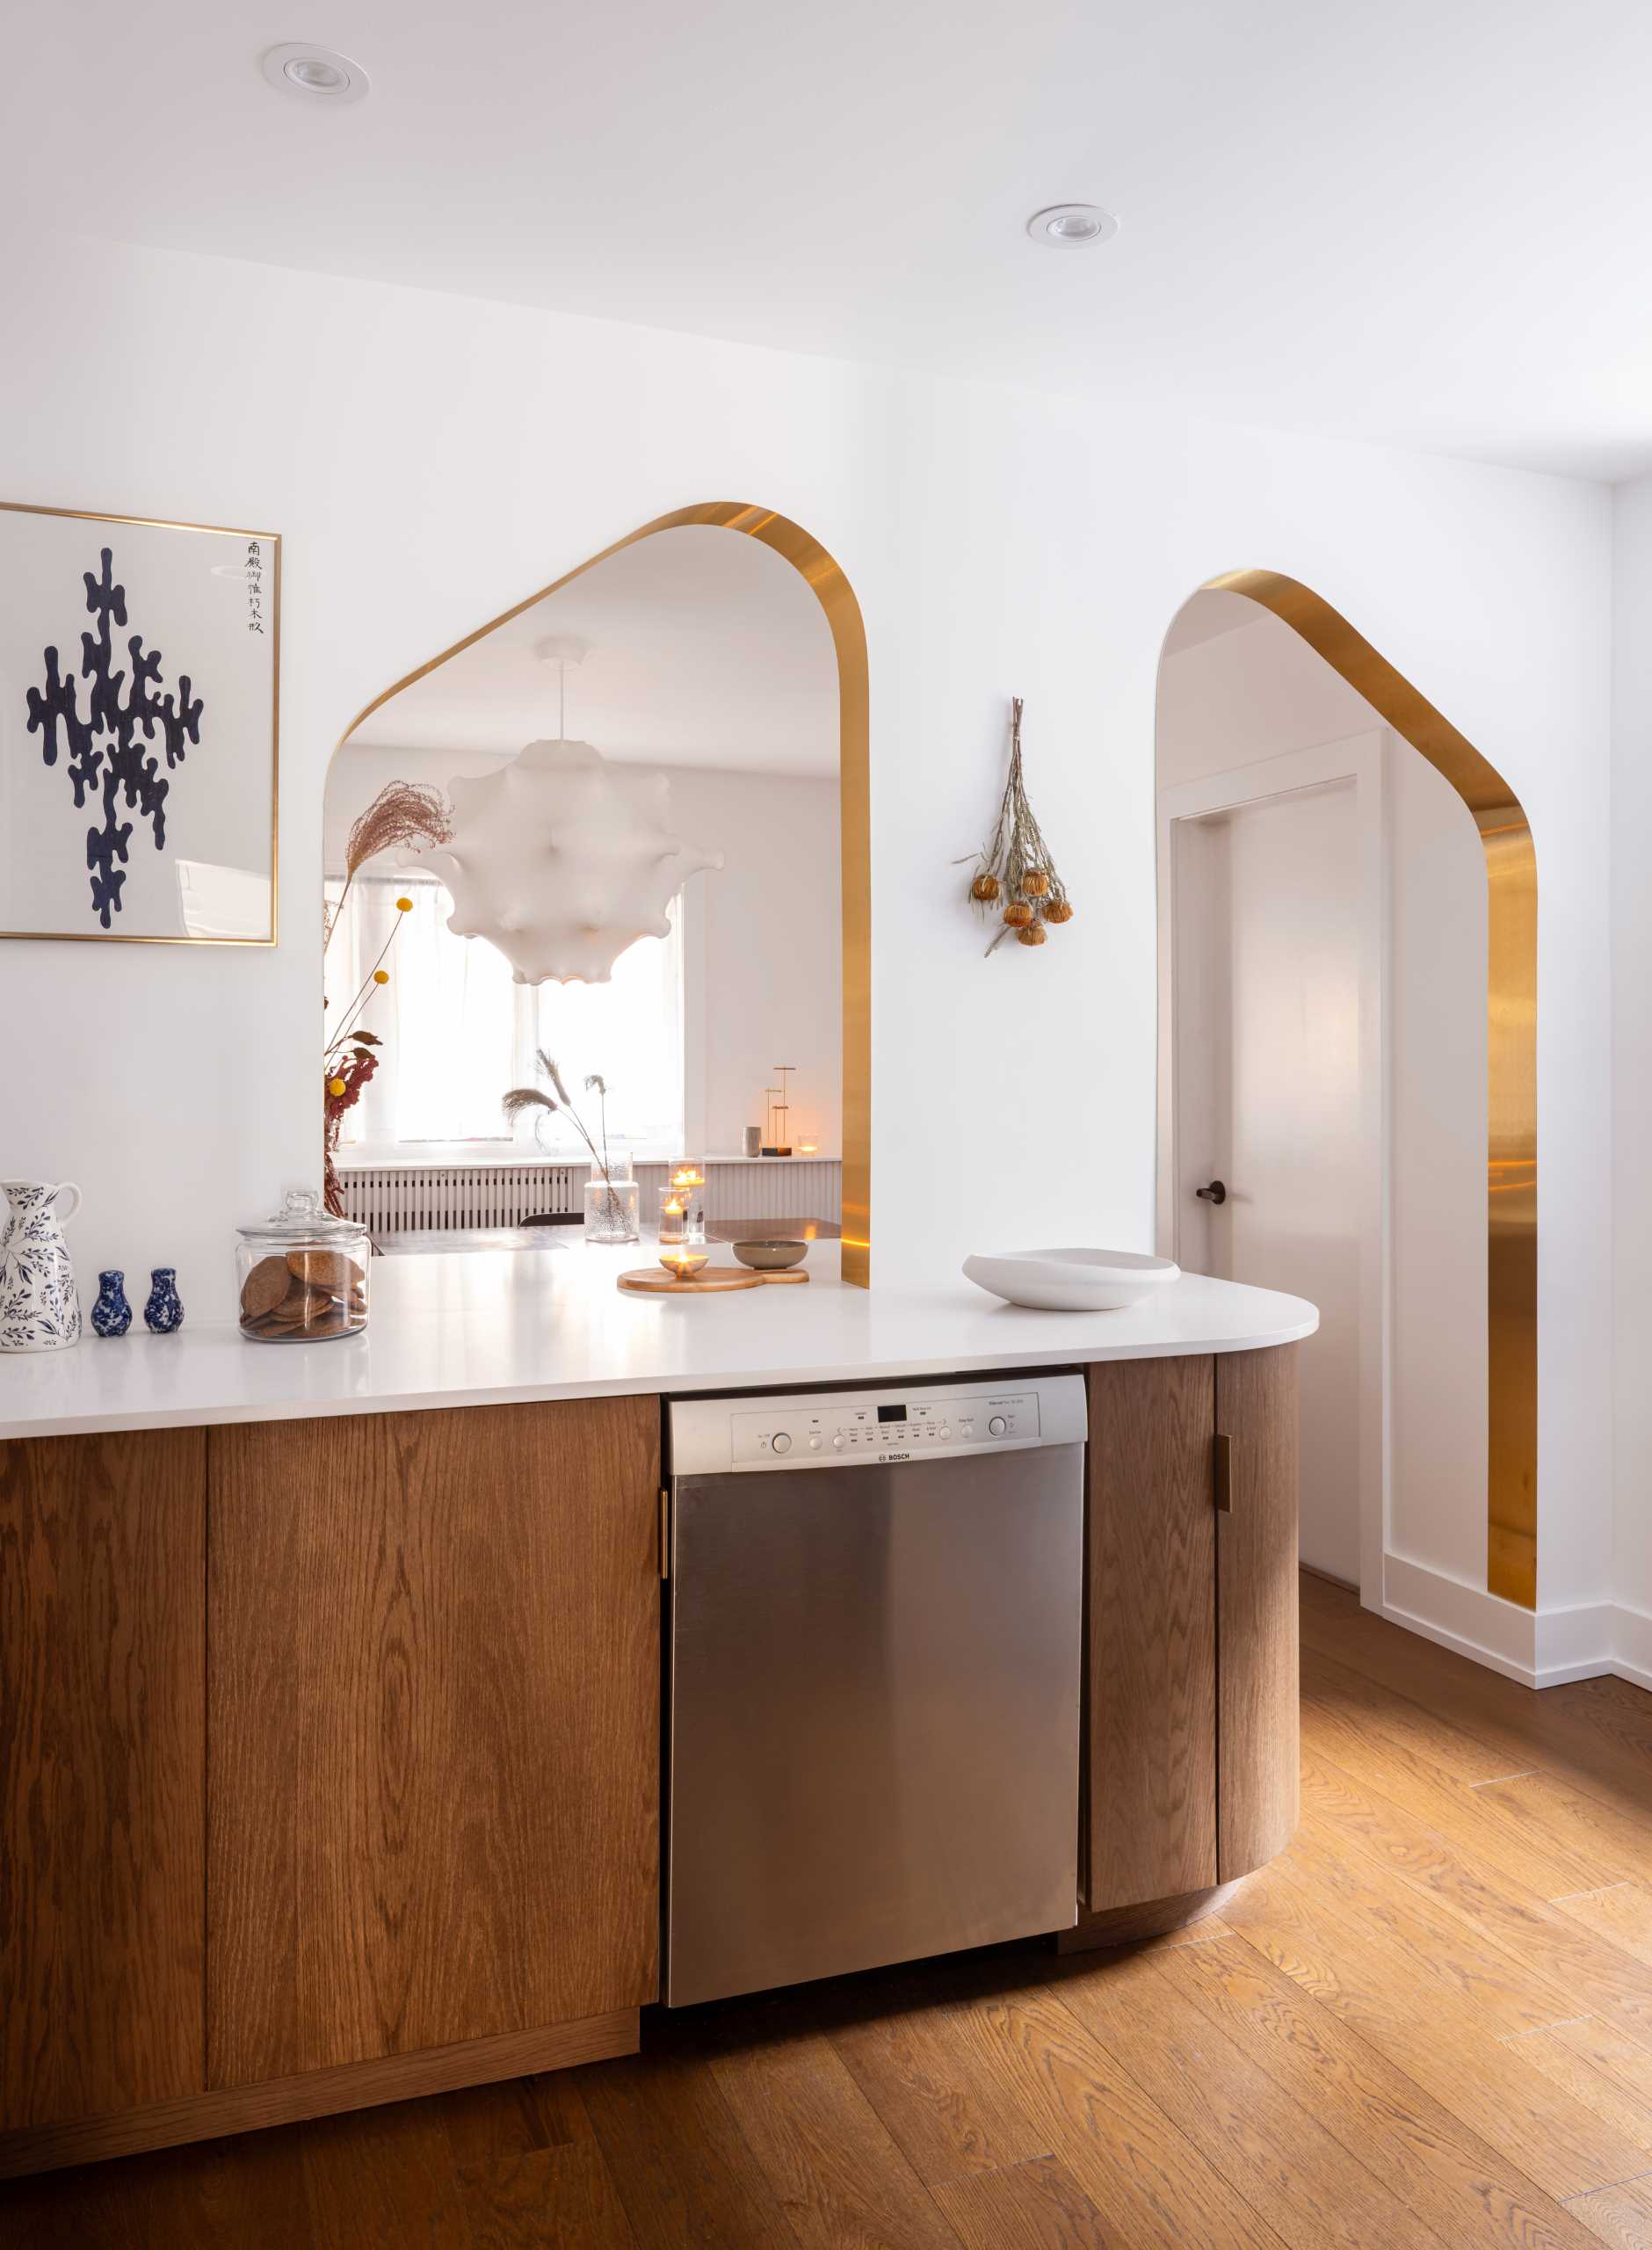 A modern kitchen with dark wood and white cabinets, white countertops, Dutch “Delft” tile, and brass-lined arches.